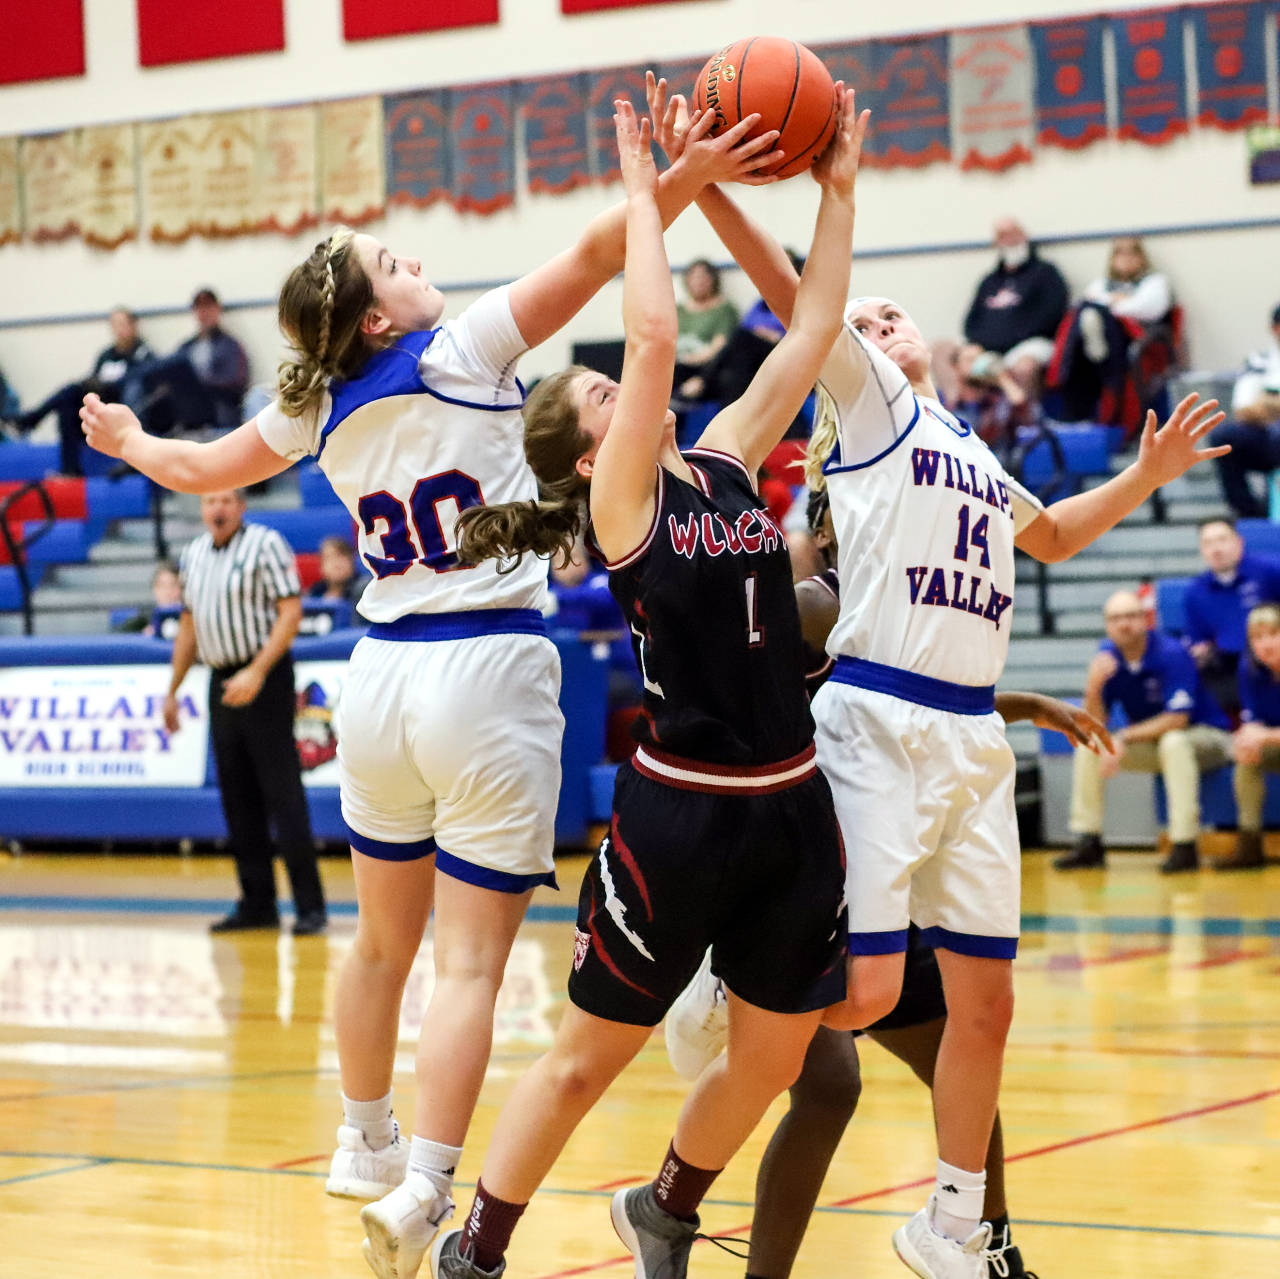 Ocosta’s Katelynn Denny, middle, is defended by Willapa Valley’s Cami Swartz (30) and Britney Patrick during Wednesday’s game at Willapa Valley High School. (Photo by Larry Bale)